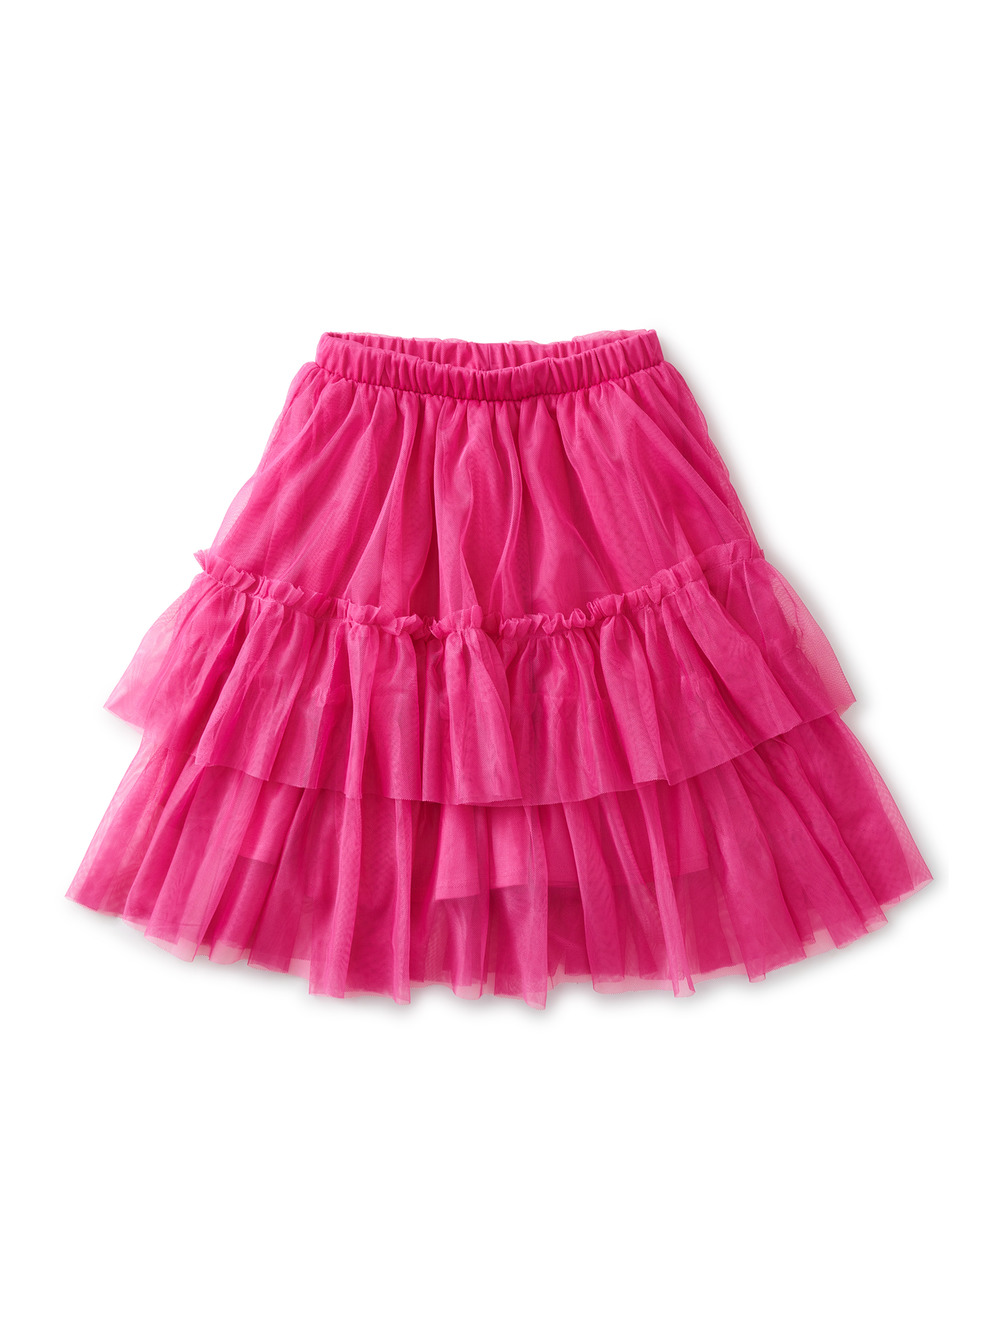 Long Tiered Tulle Skirt